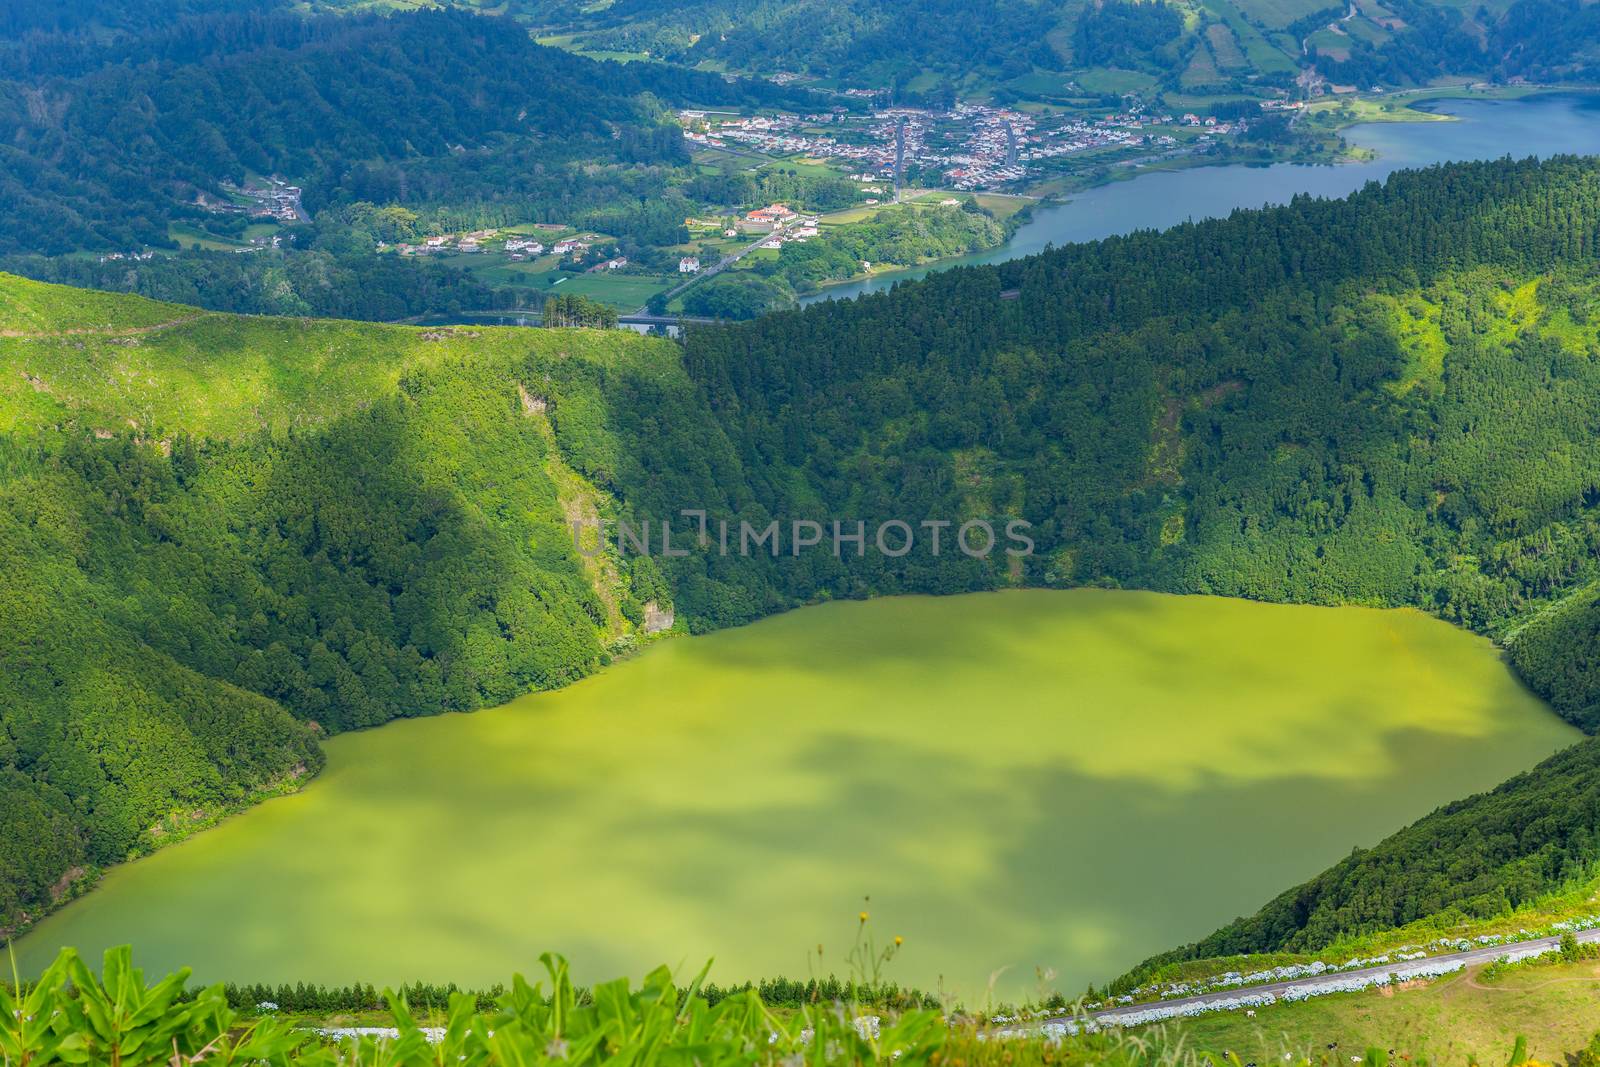 Sete Cidades from above by zittto